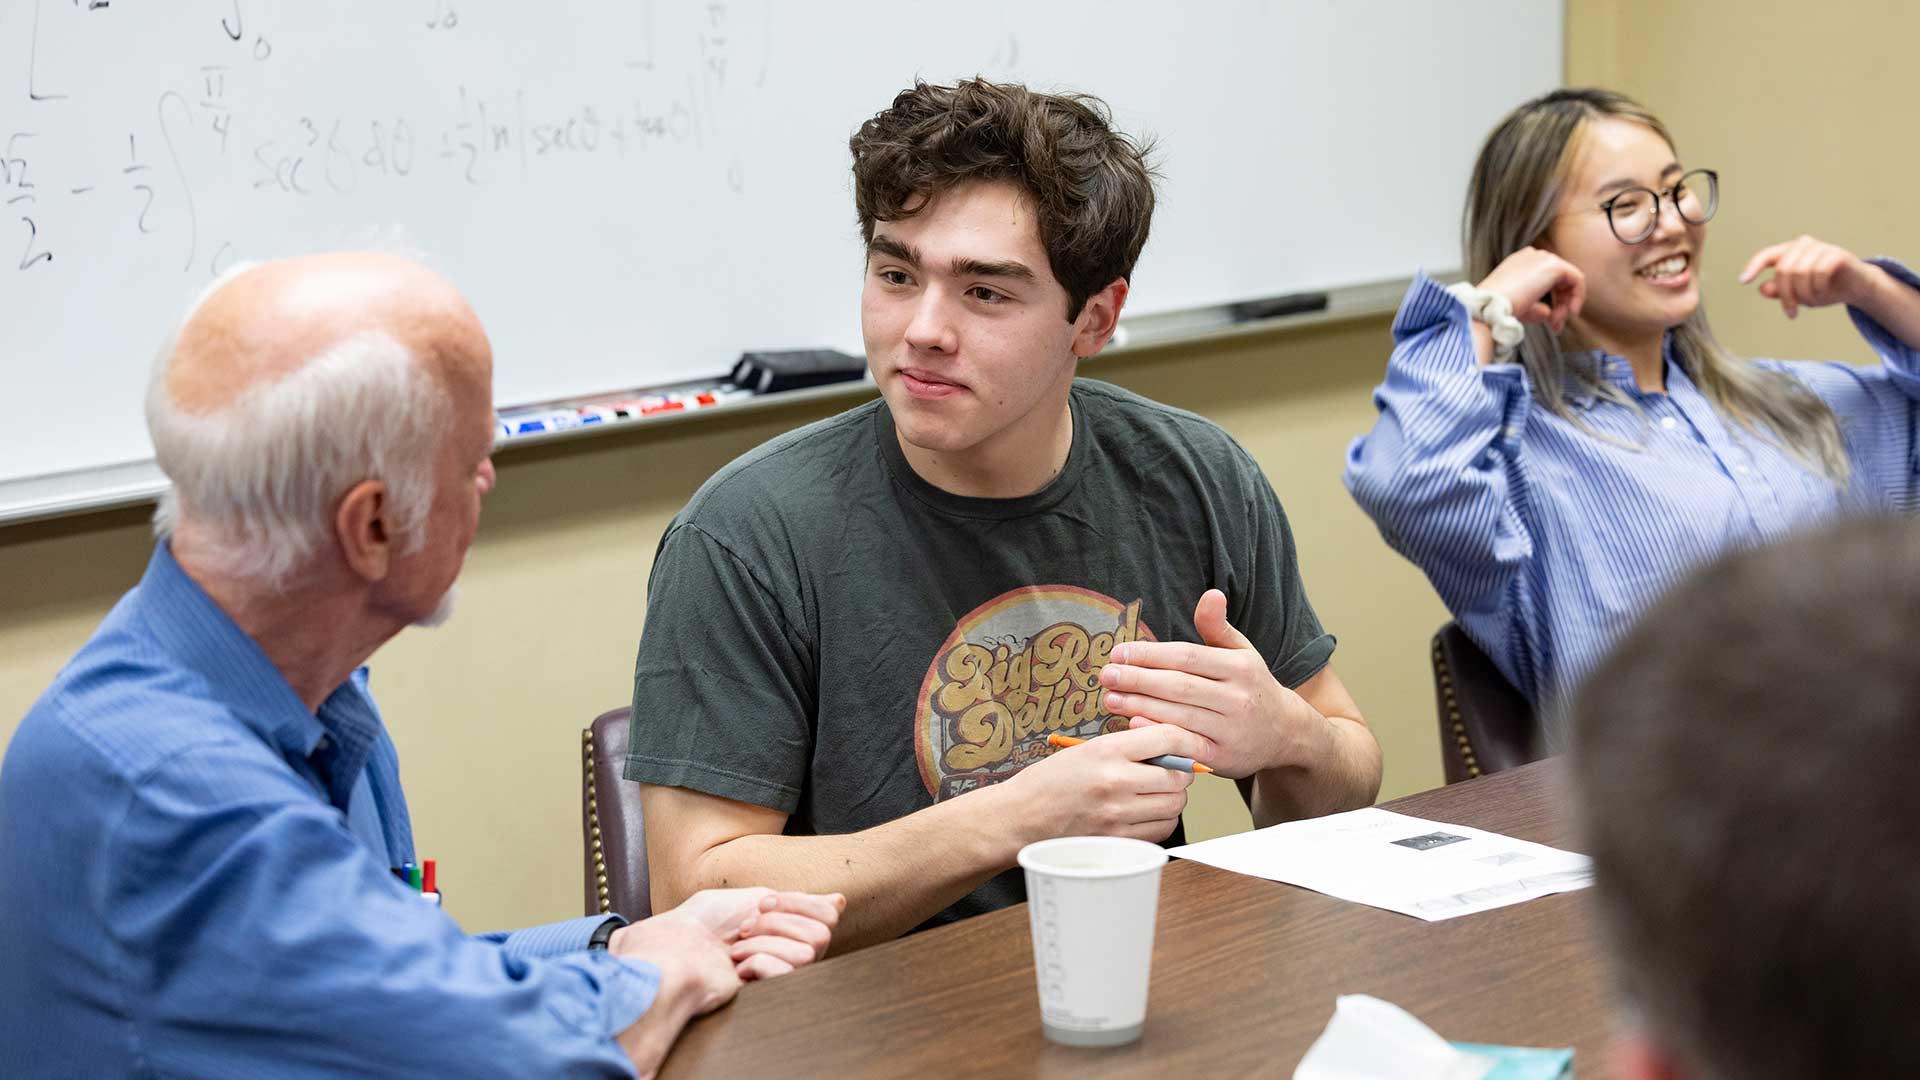 A professor and student have a conversation during a math problem-solving group meeting.